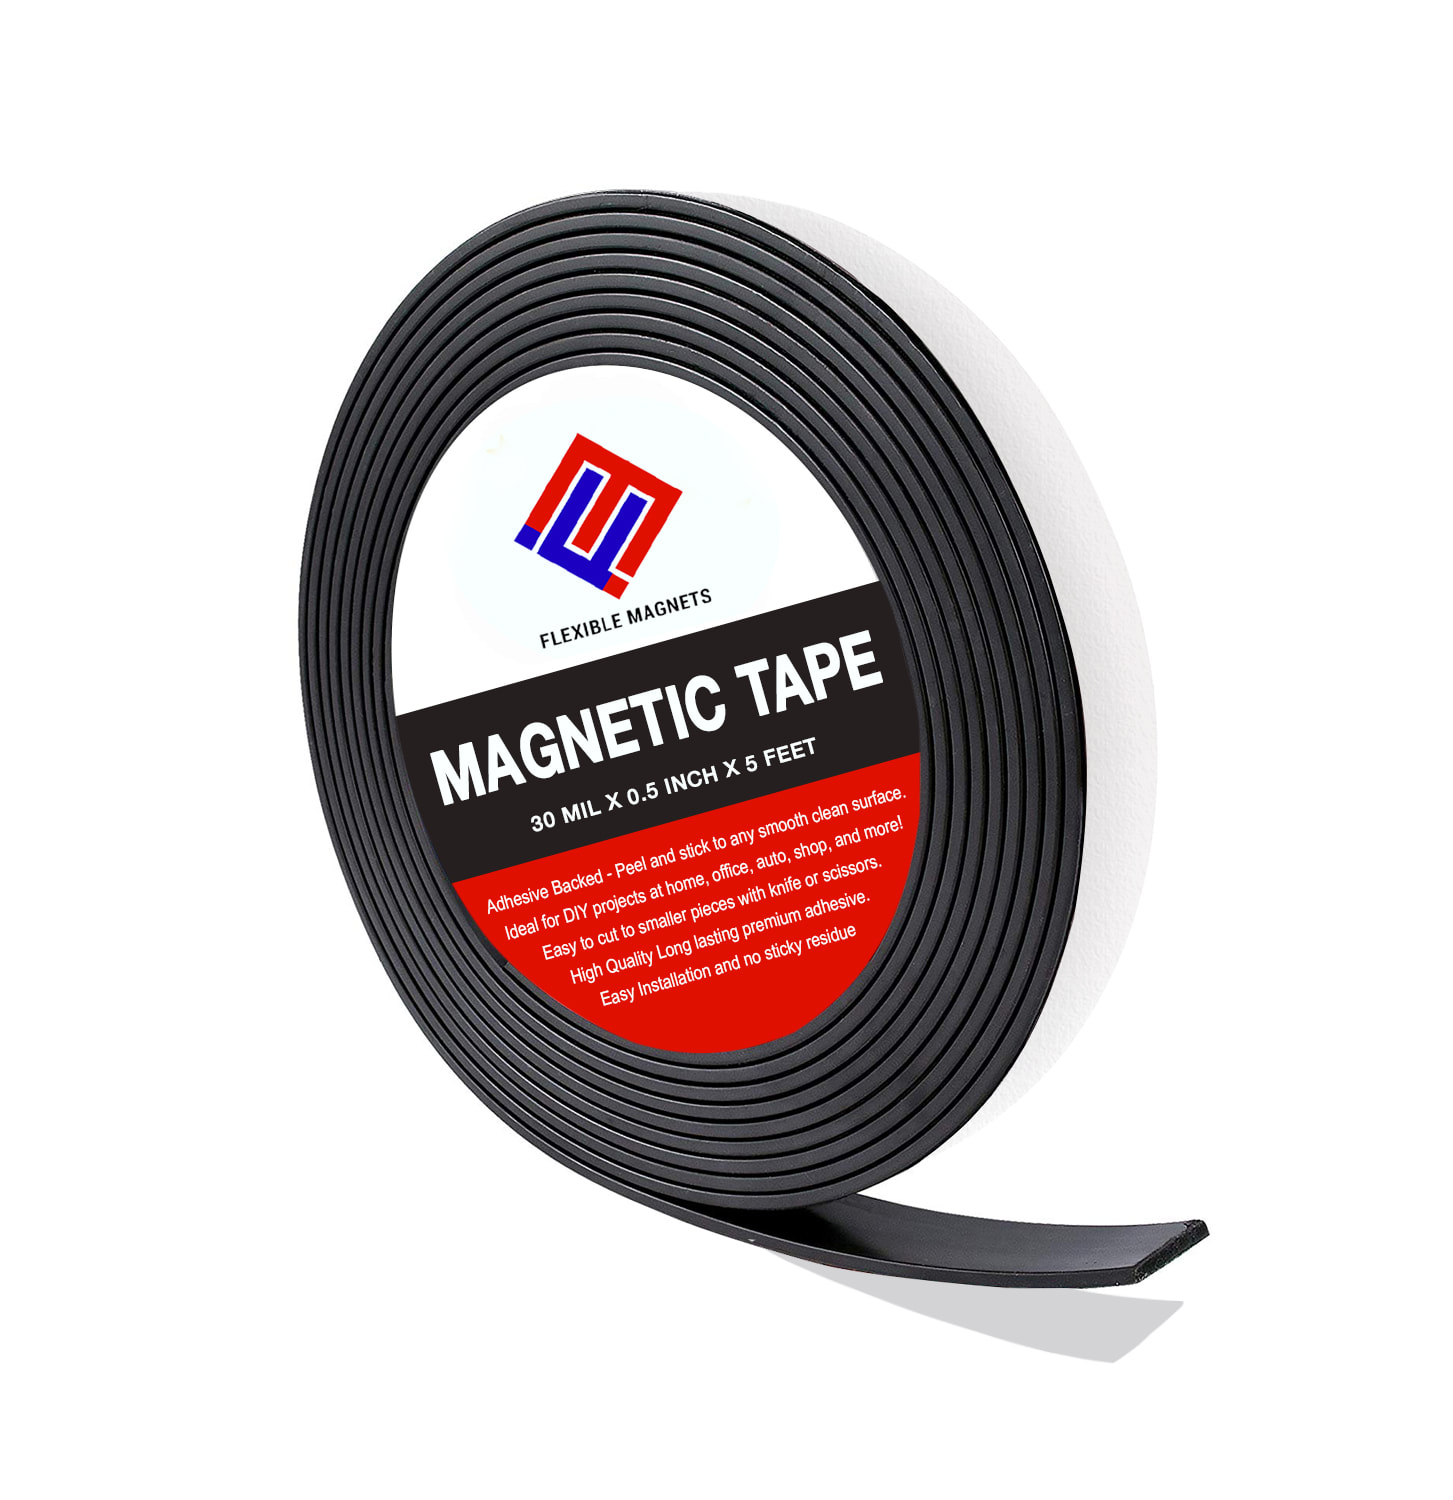 30 mil Ideal Adhesive Magnetic Strip Flexible Magnet Tape 1" wide x 10 feet 